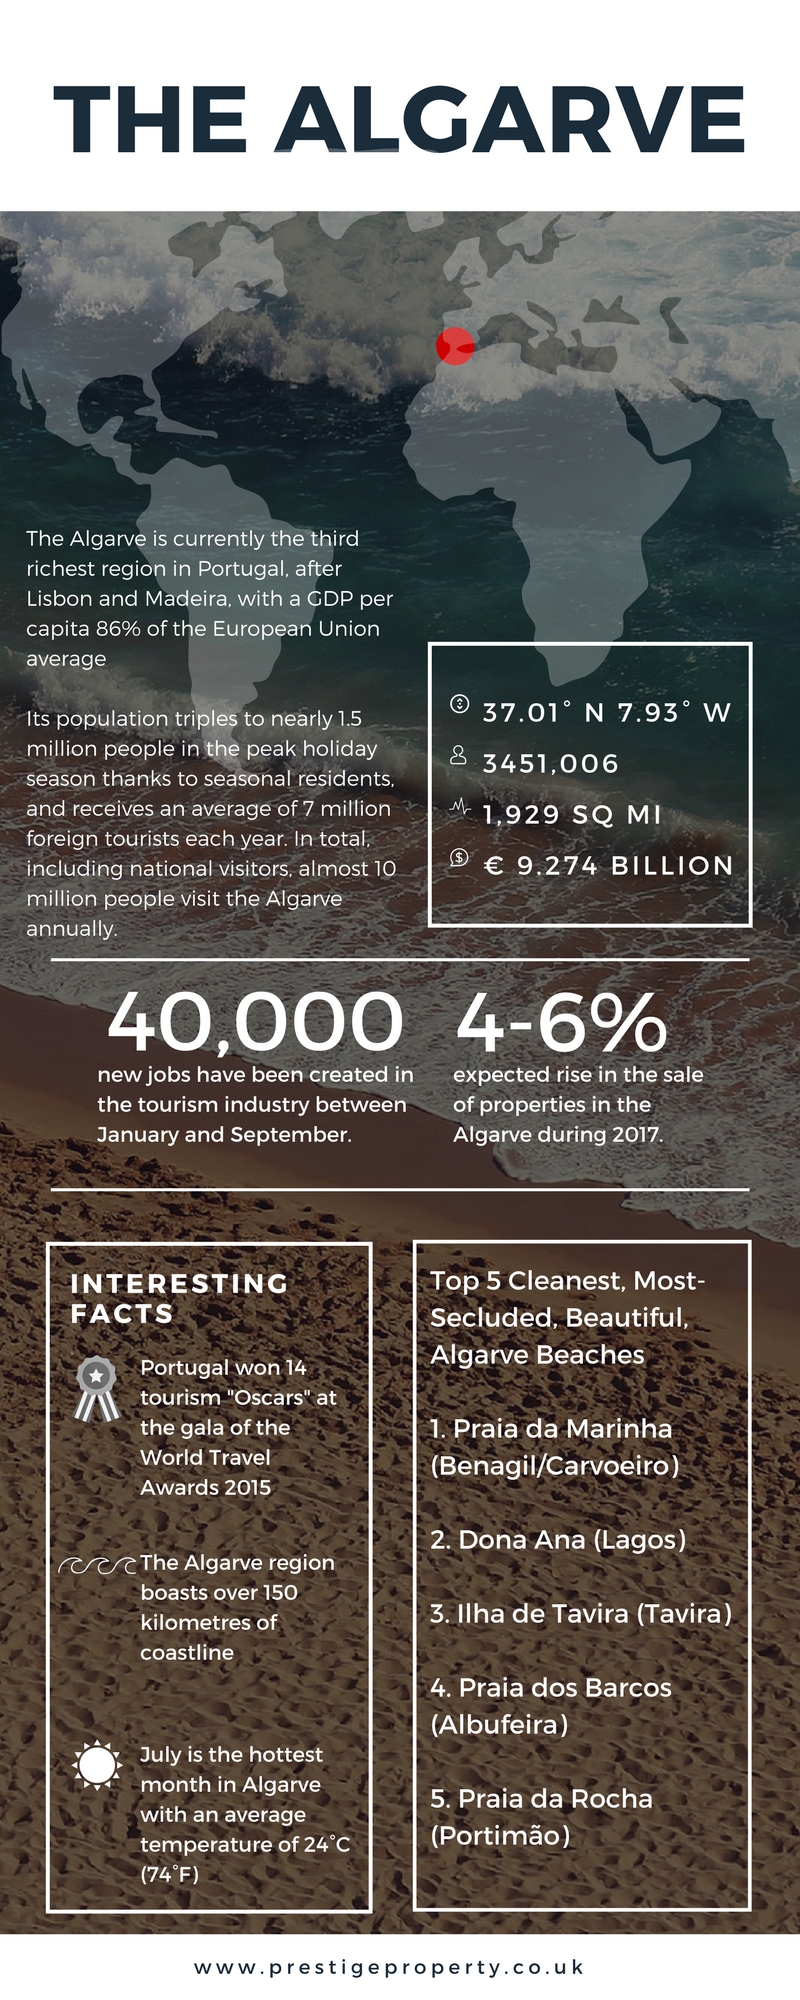 Prestige Property’s infographic with essential facts on the Algarve